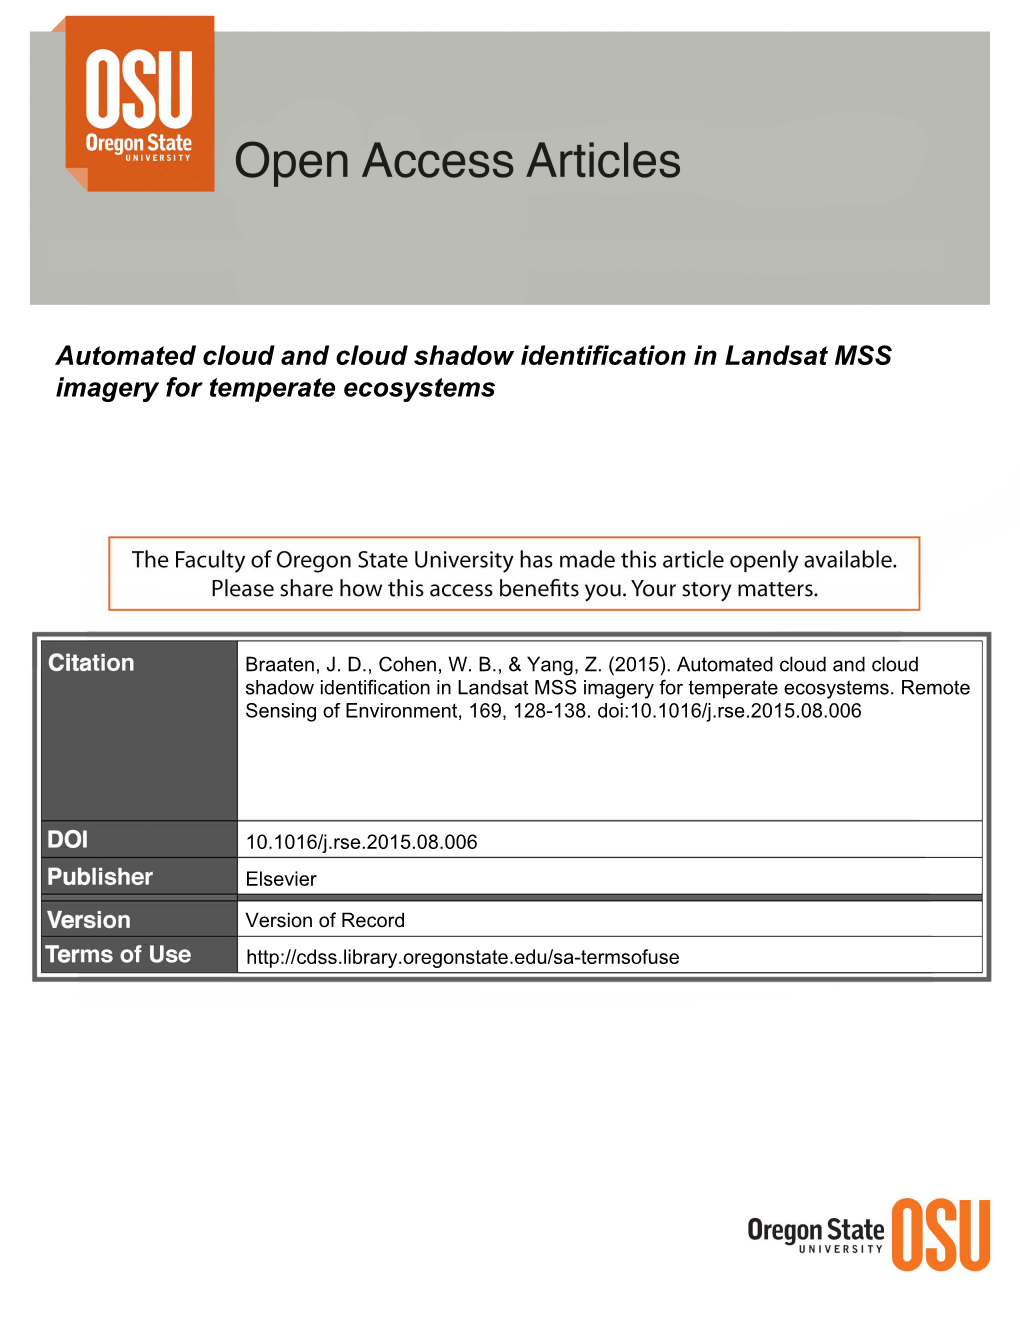 Automated Cloud and Cloud Shadow Identification in Landsat MSS Imagery for Temperate Ecosystems